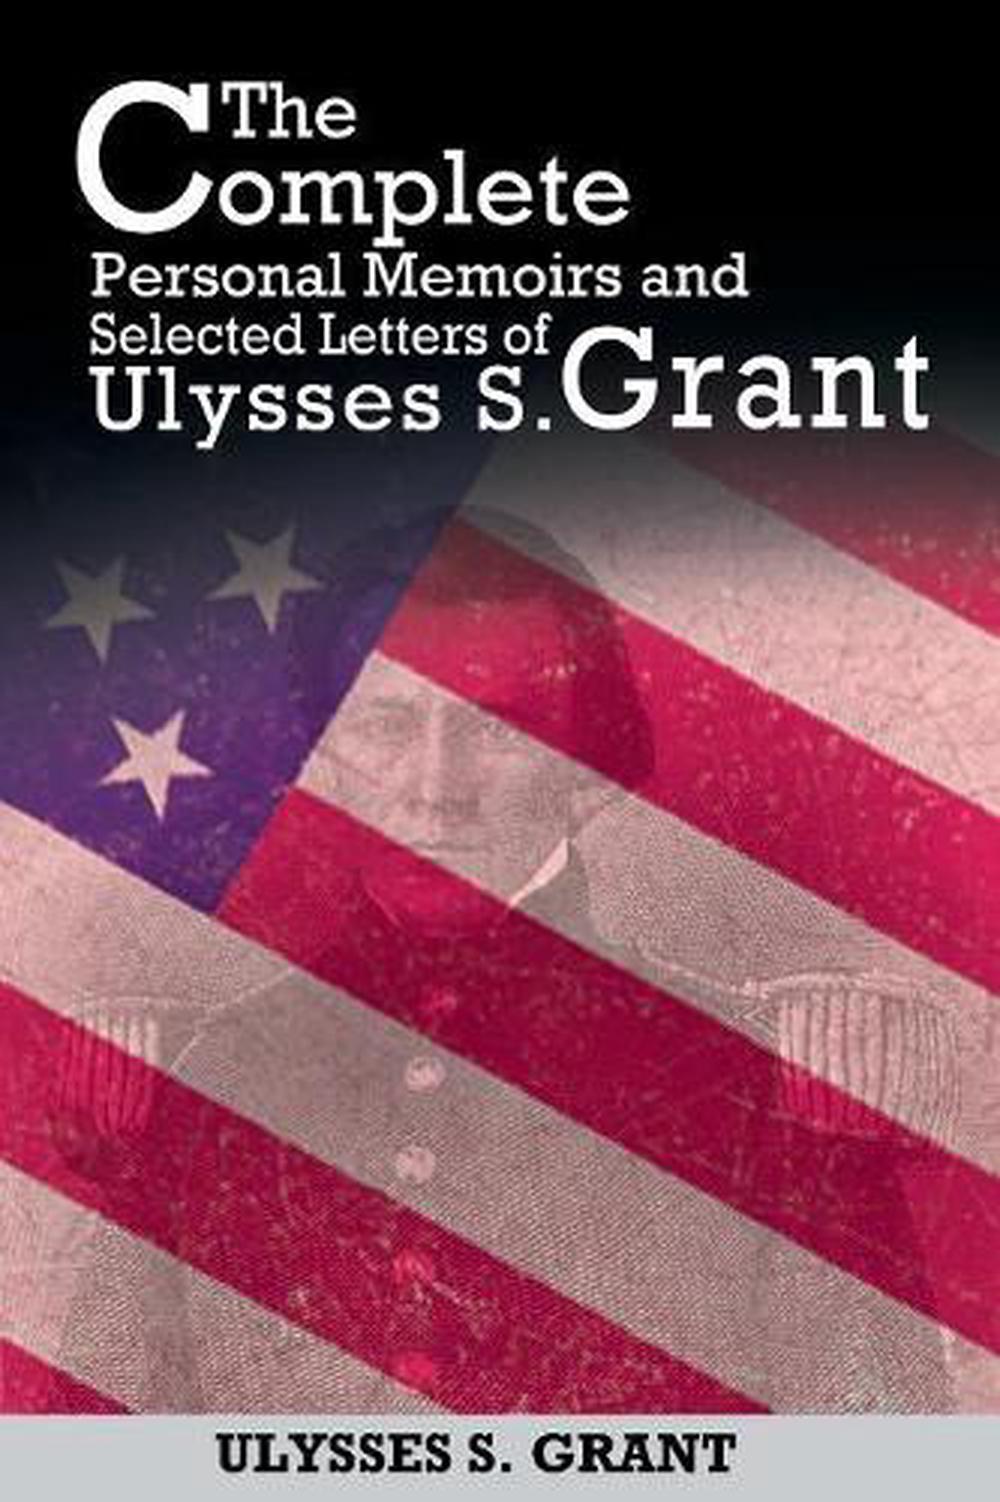 Memoirs and Selected Letters by Ulysses S. Grant